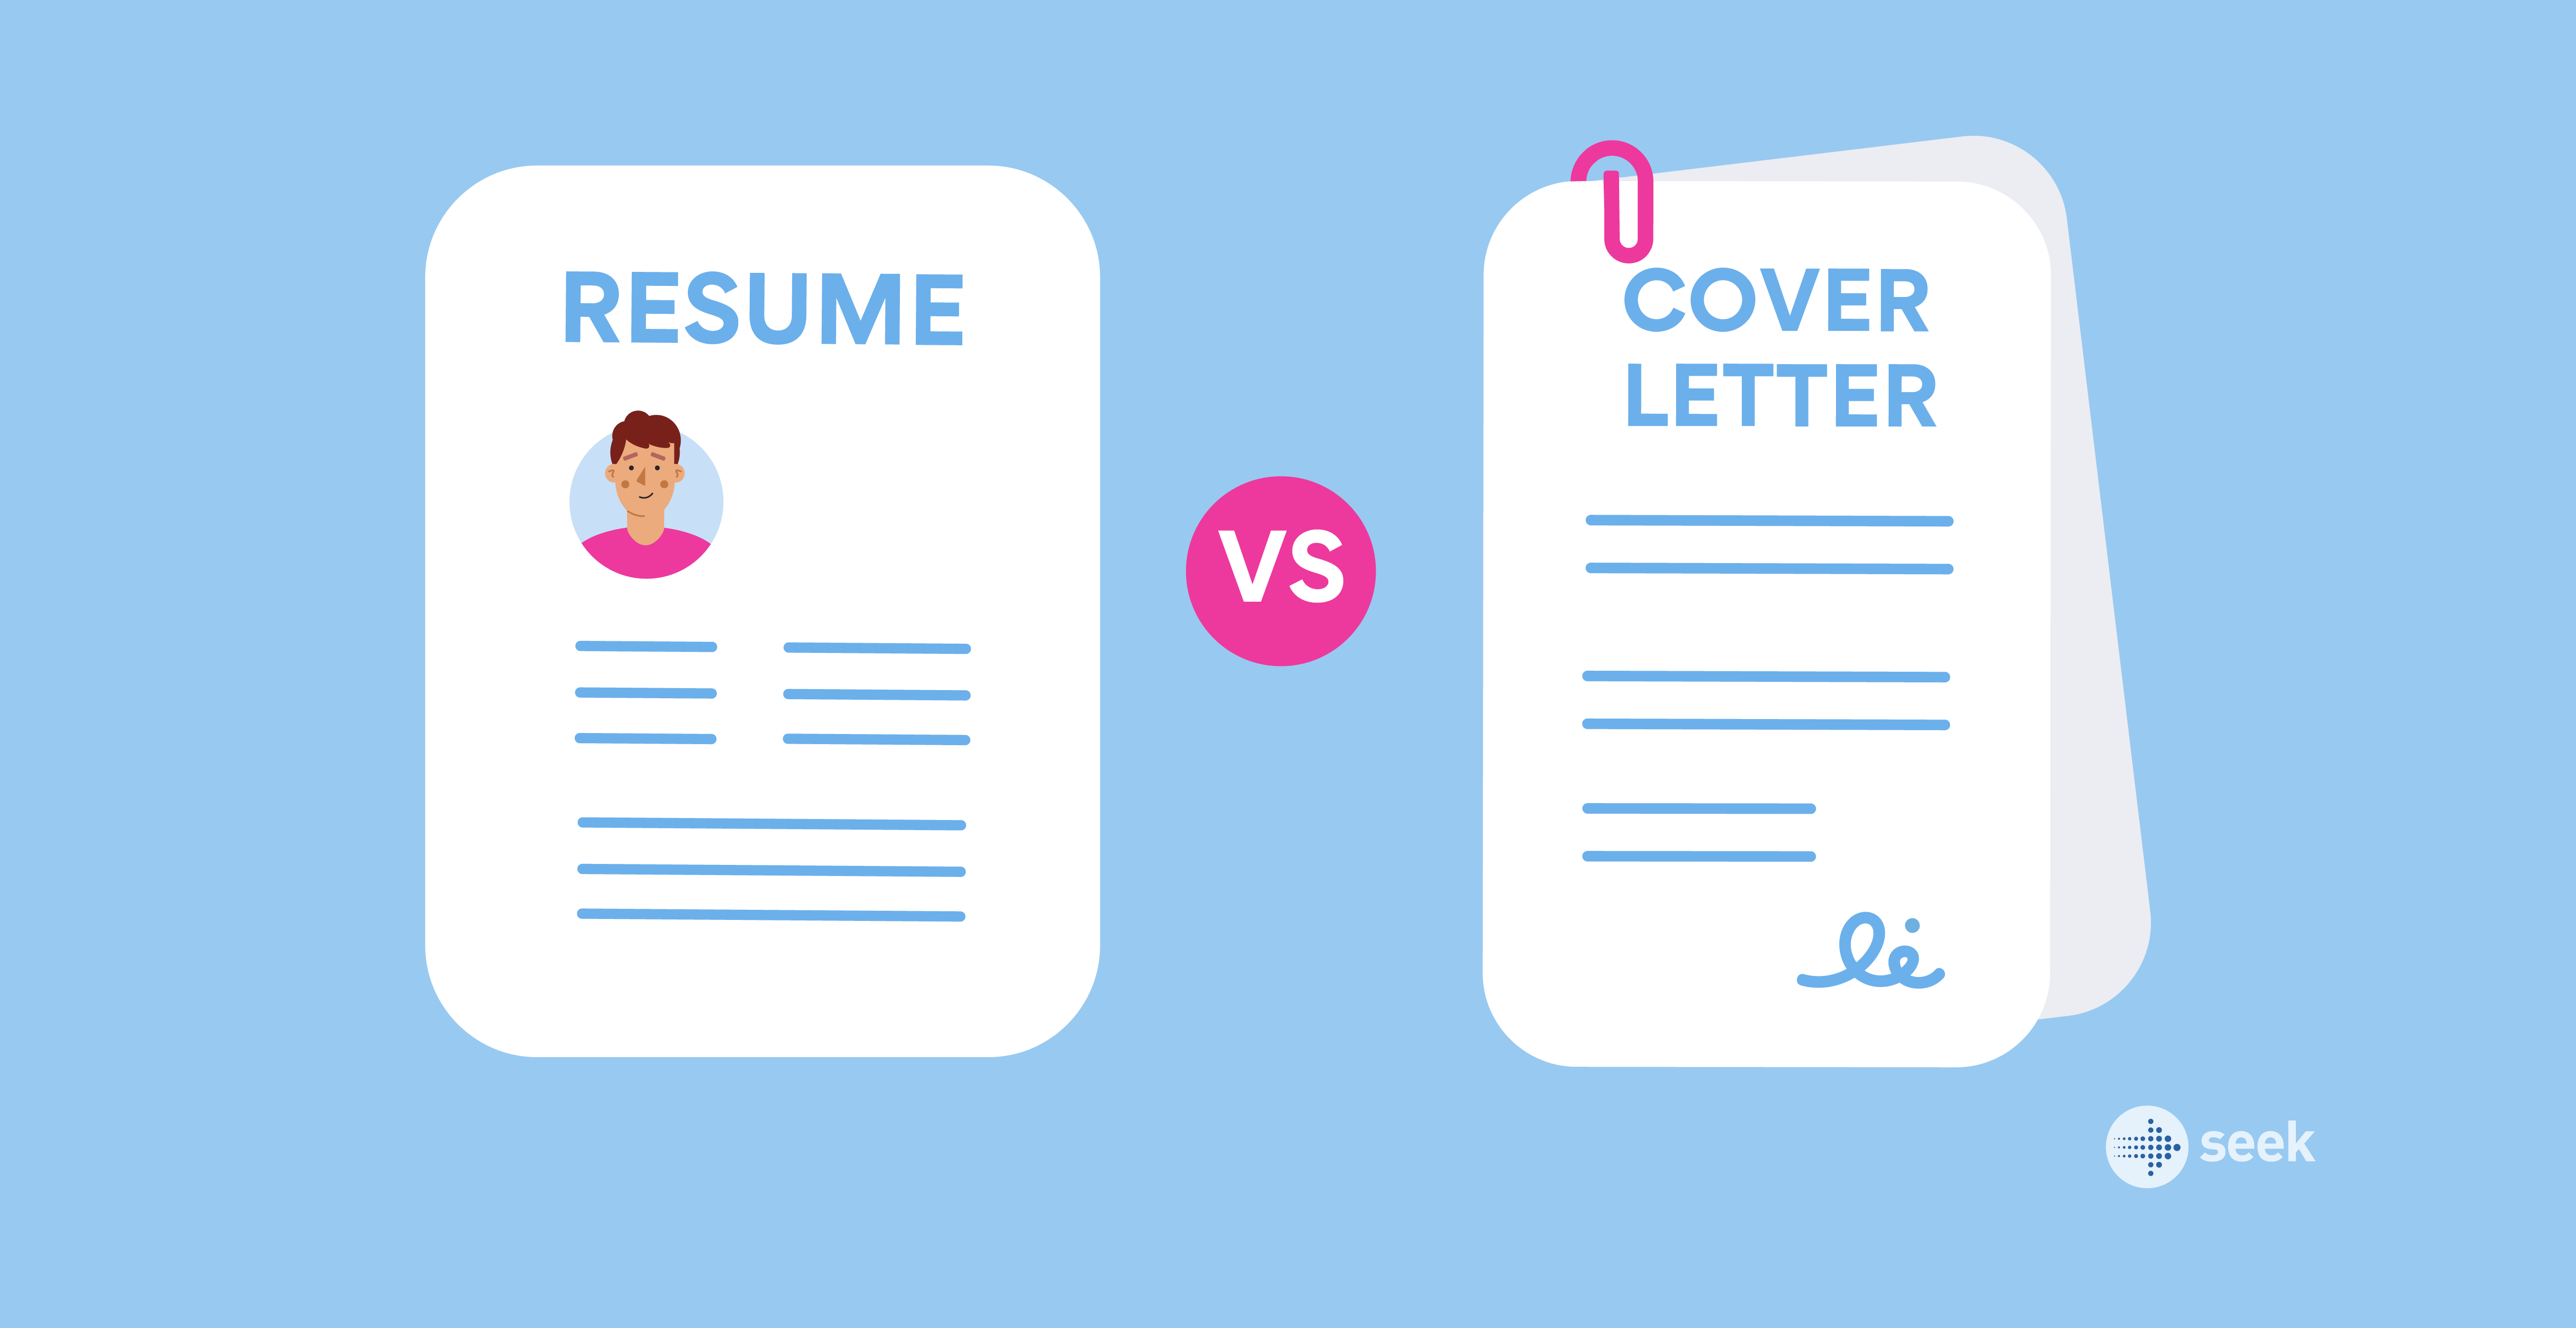 The difference between a cover letter vs resumé